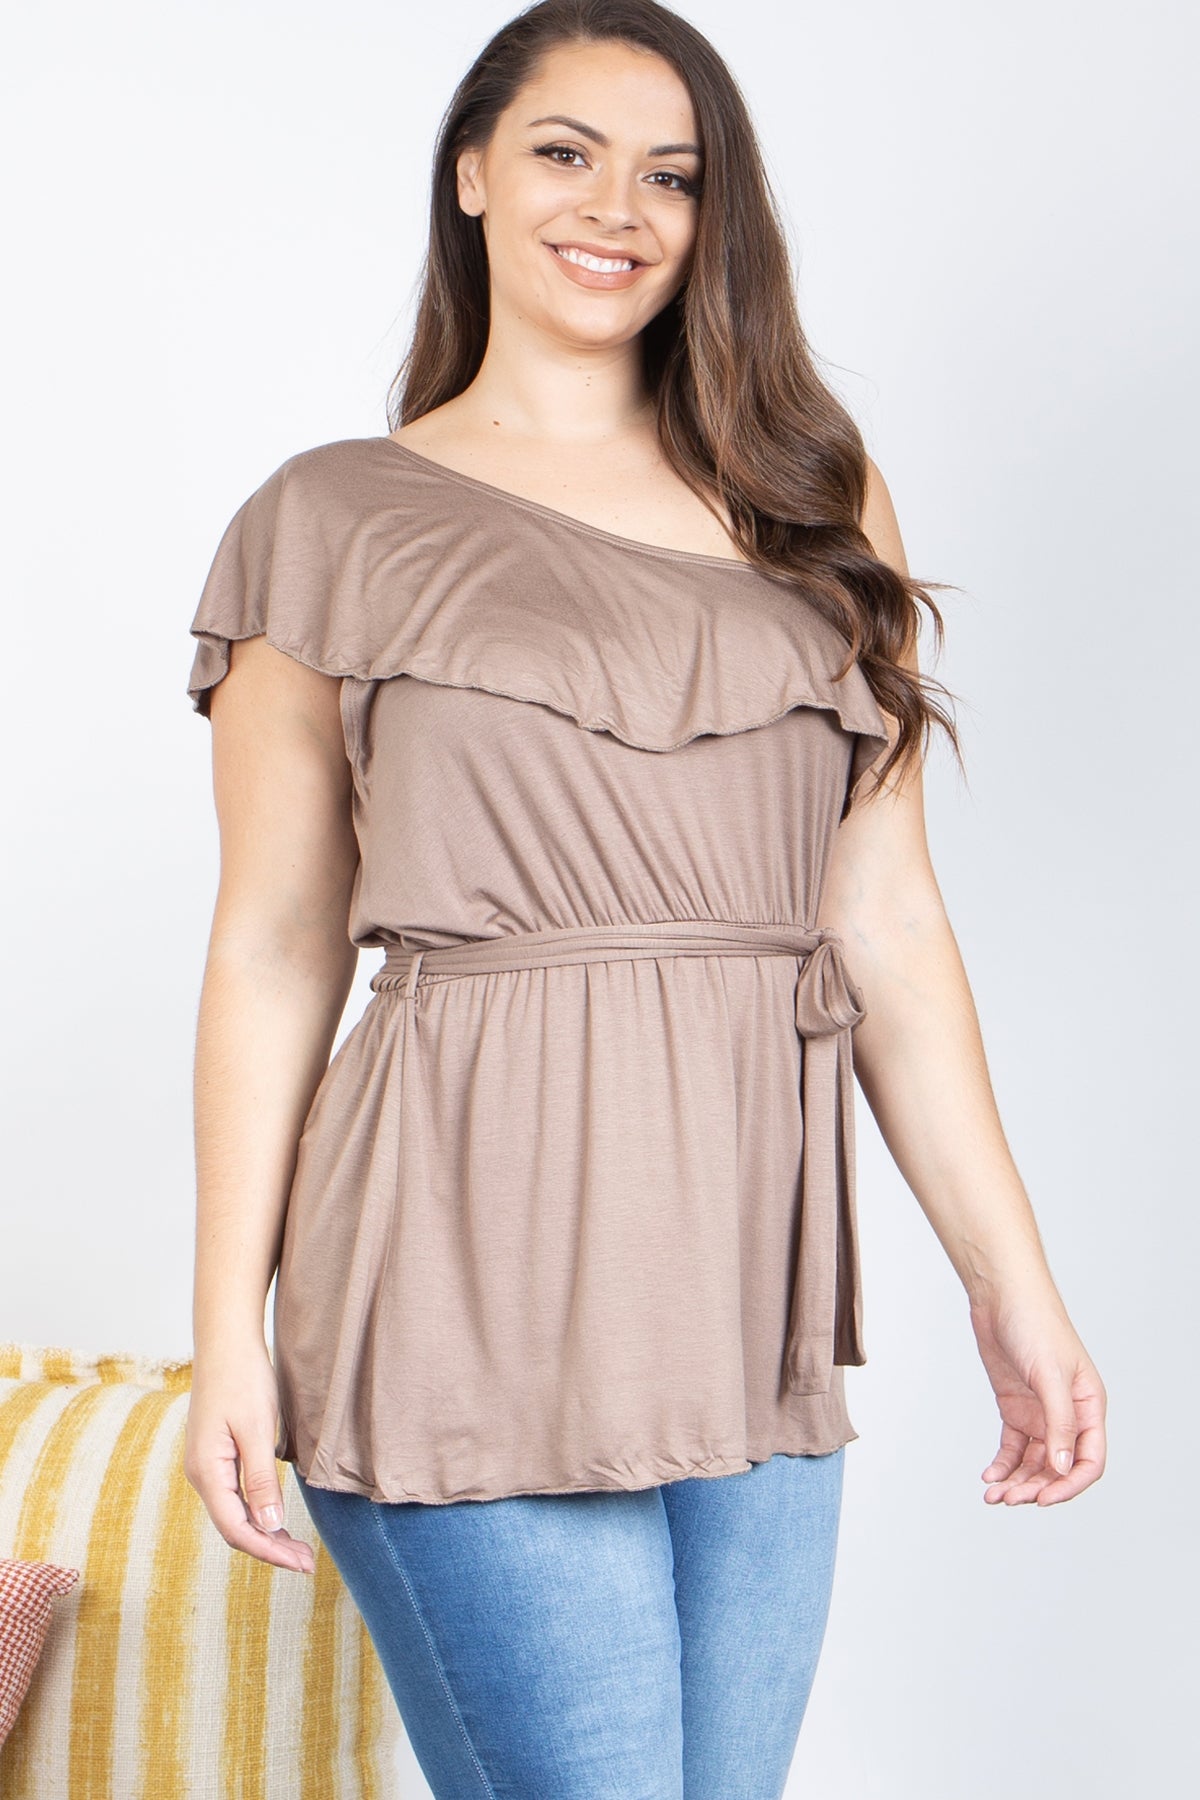 BROWN PLUS SIZE ONE SIDE COLD SHOULDER TOP